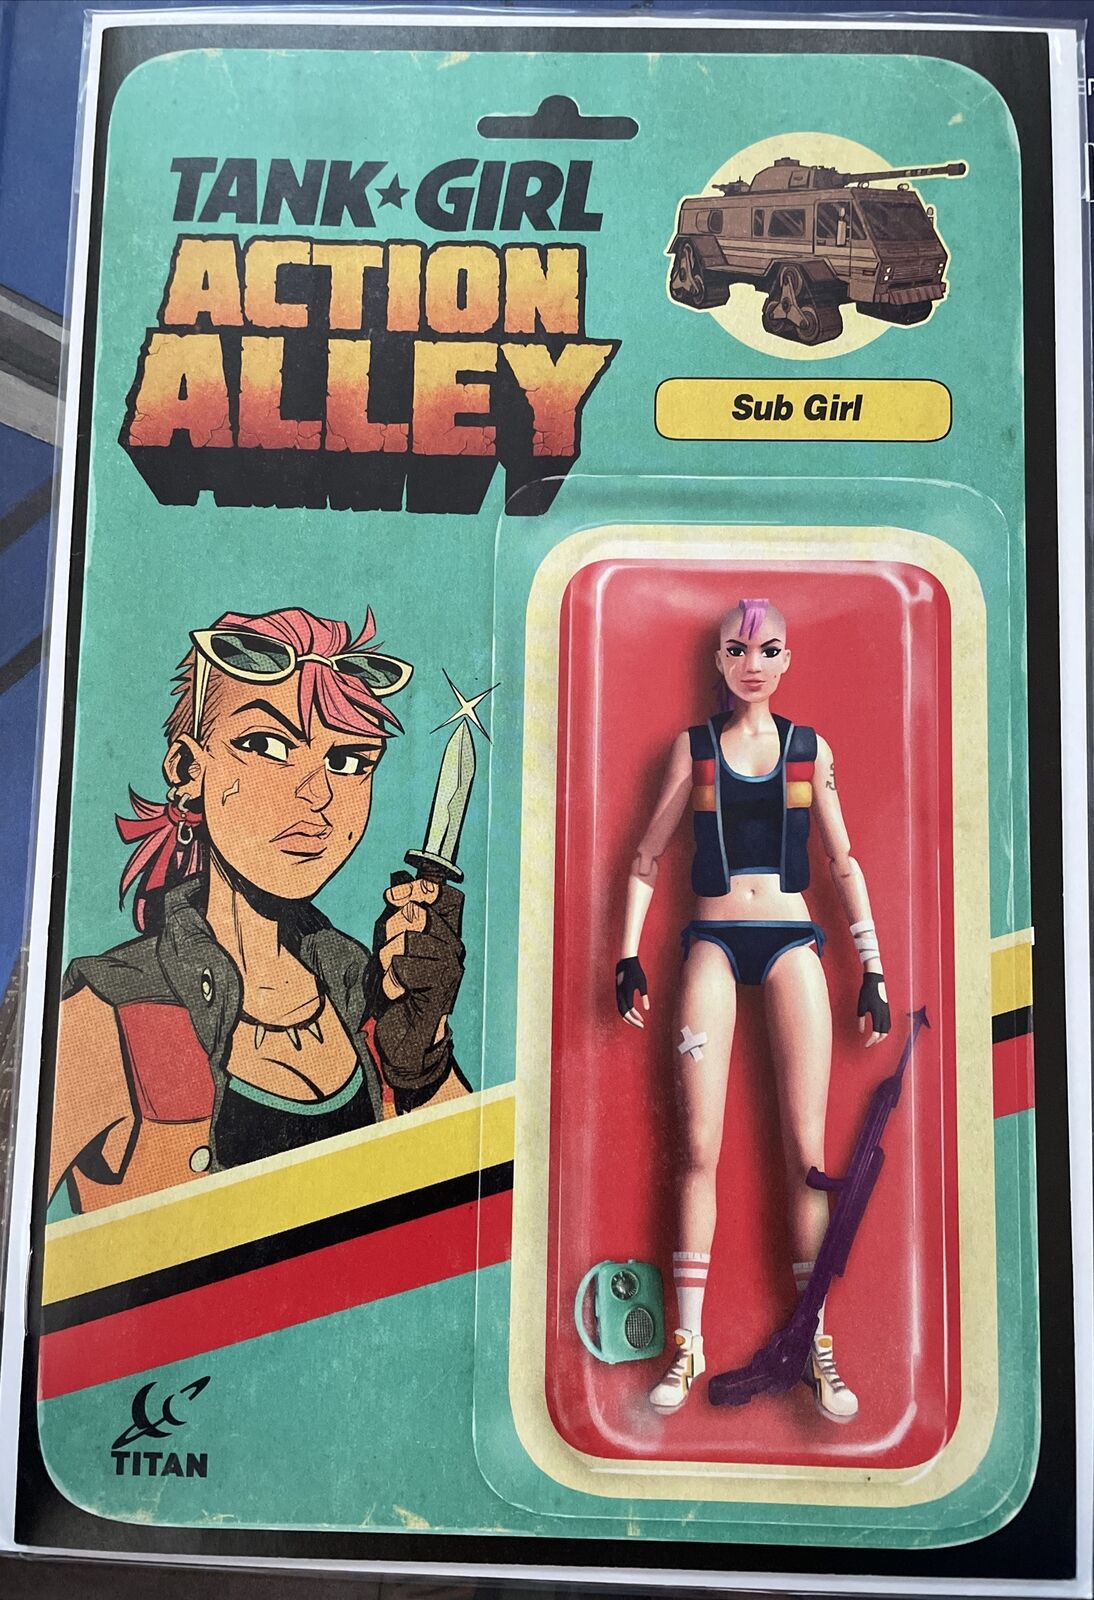 TANK GIRL #4 Action Alley #4 Cover B Action Figure Variant 2019 Titan Comics